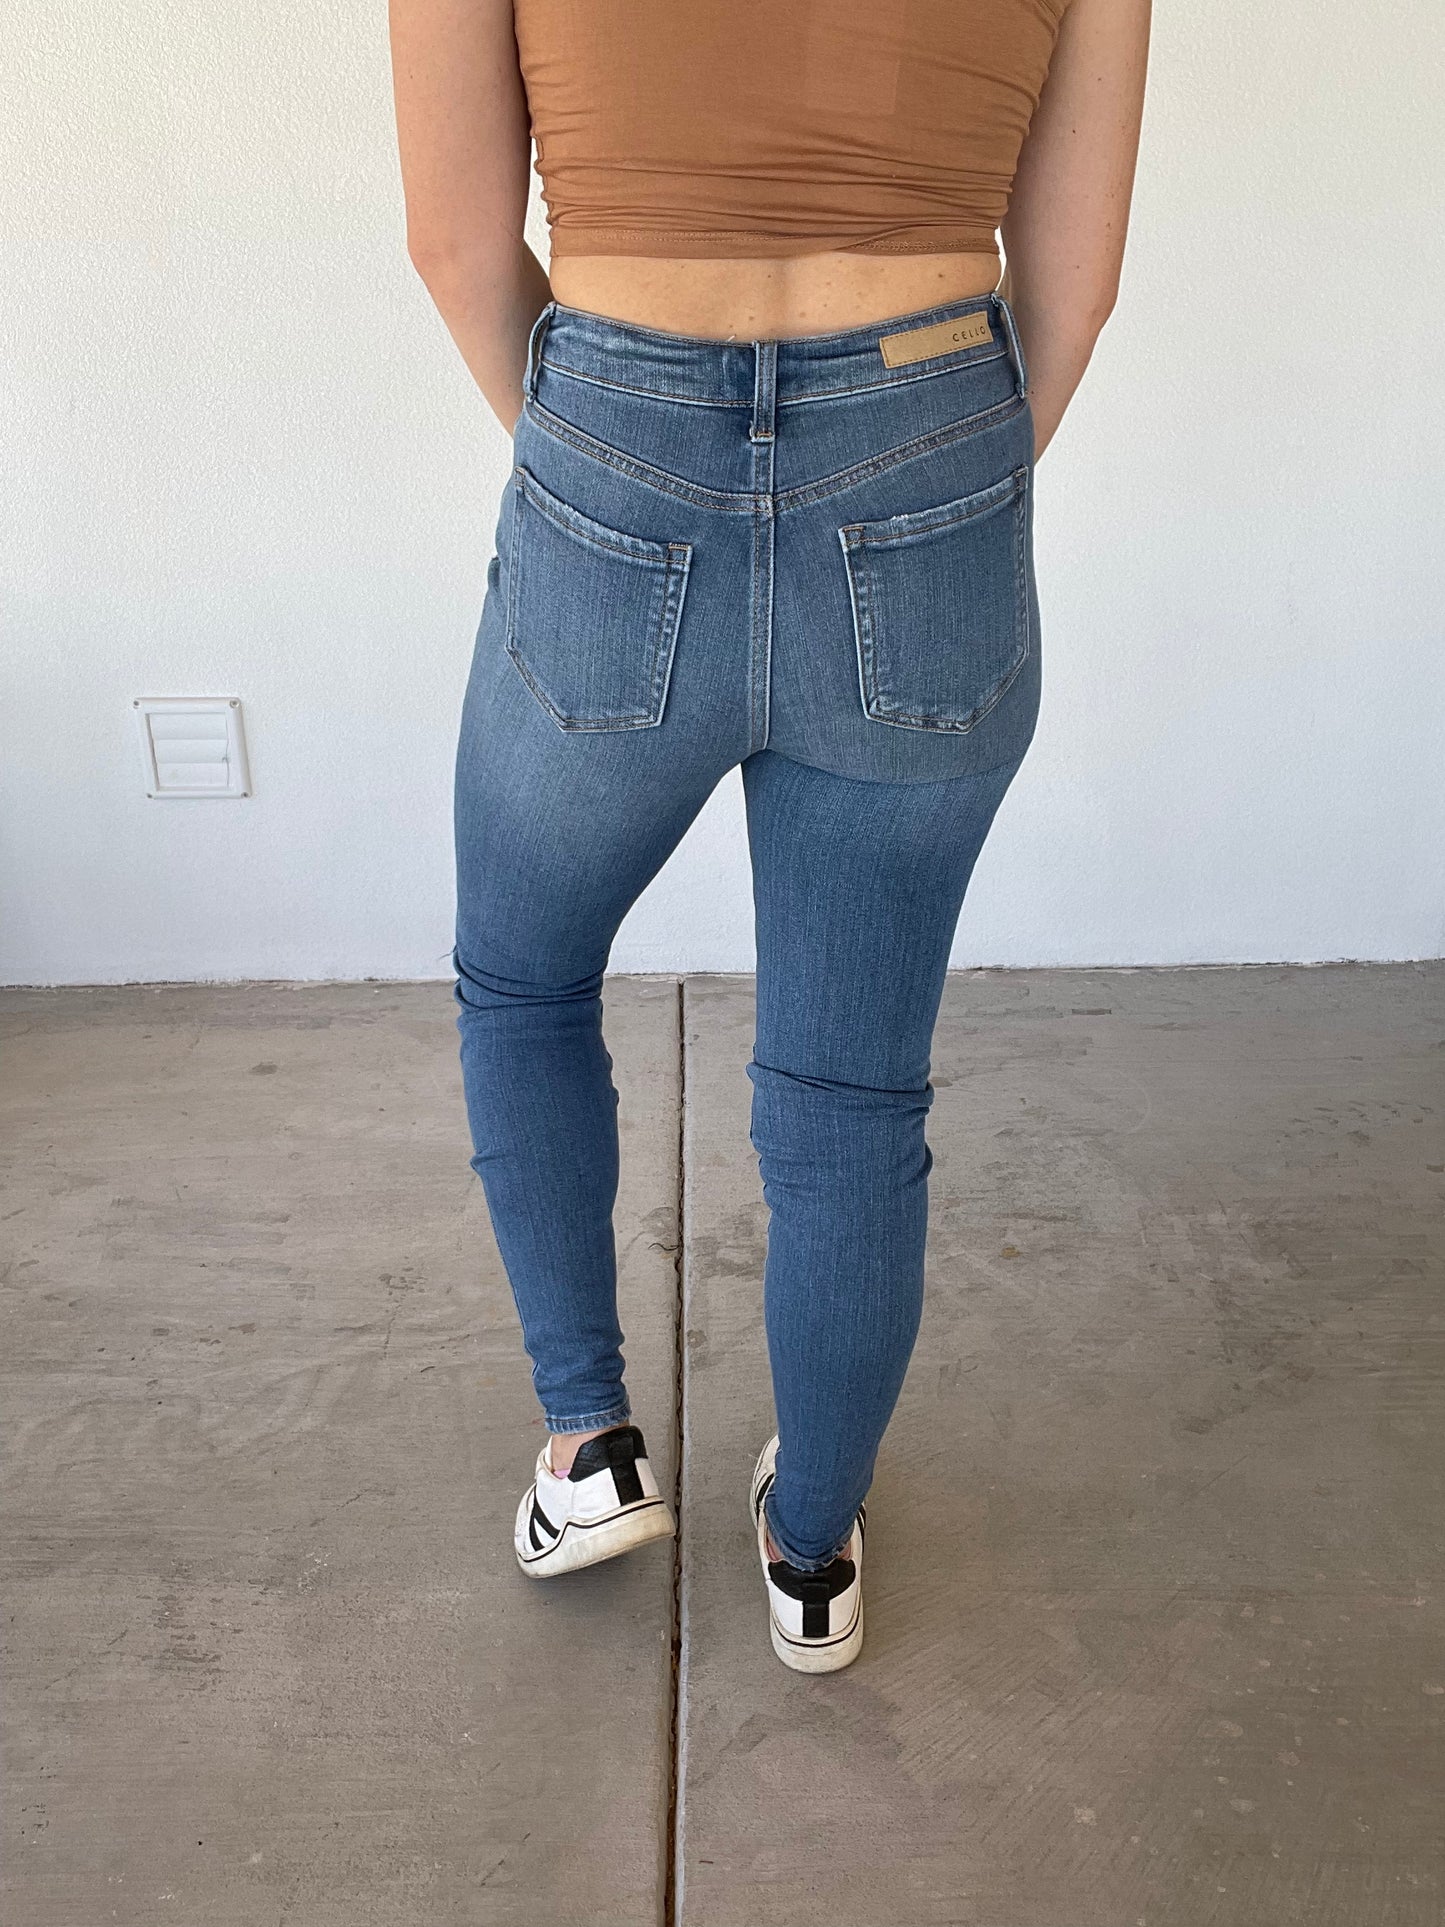 The Upbeat Jeans